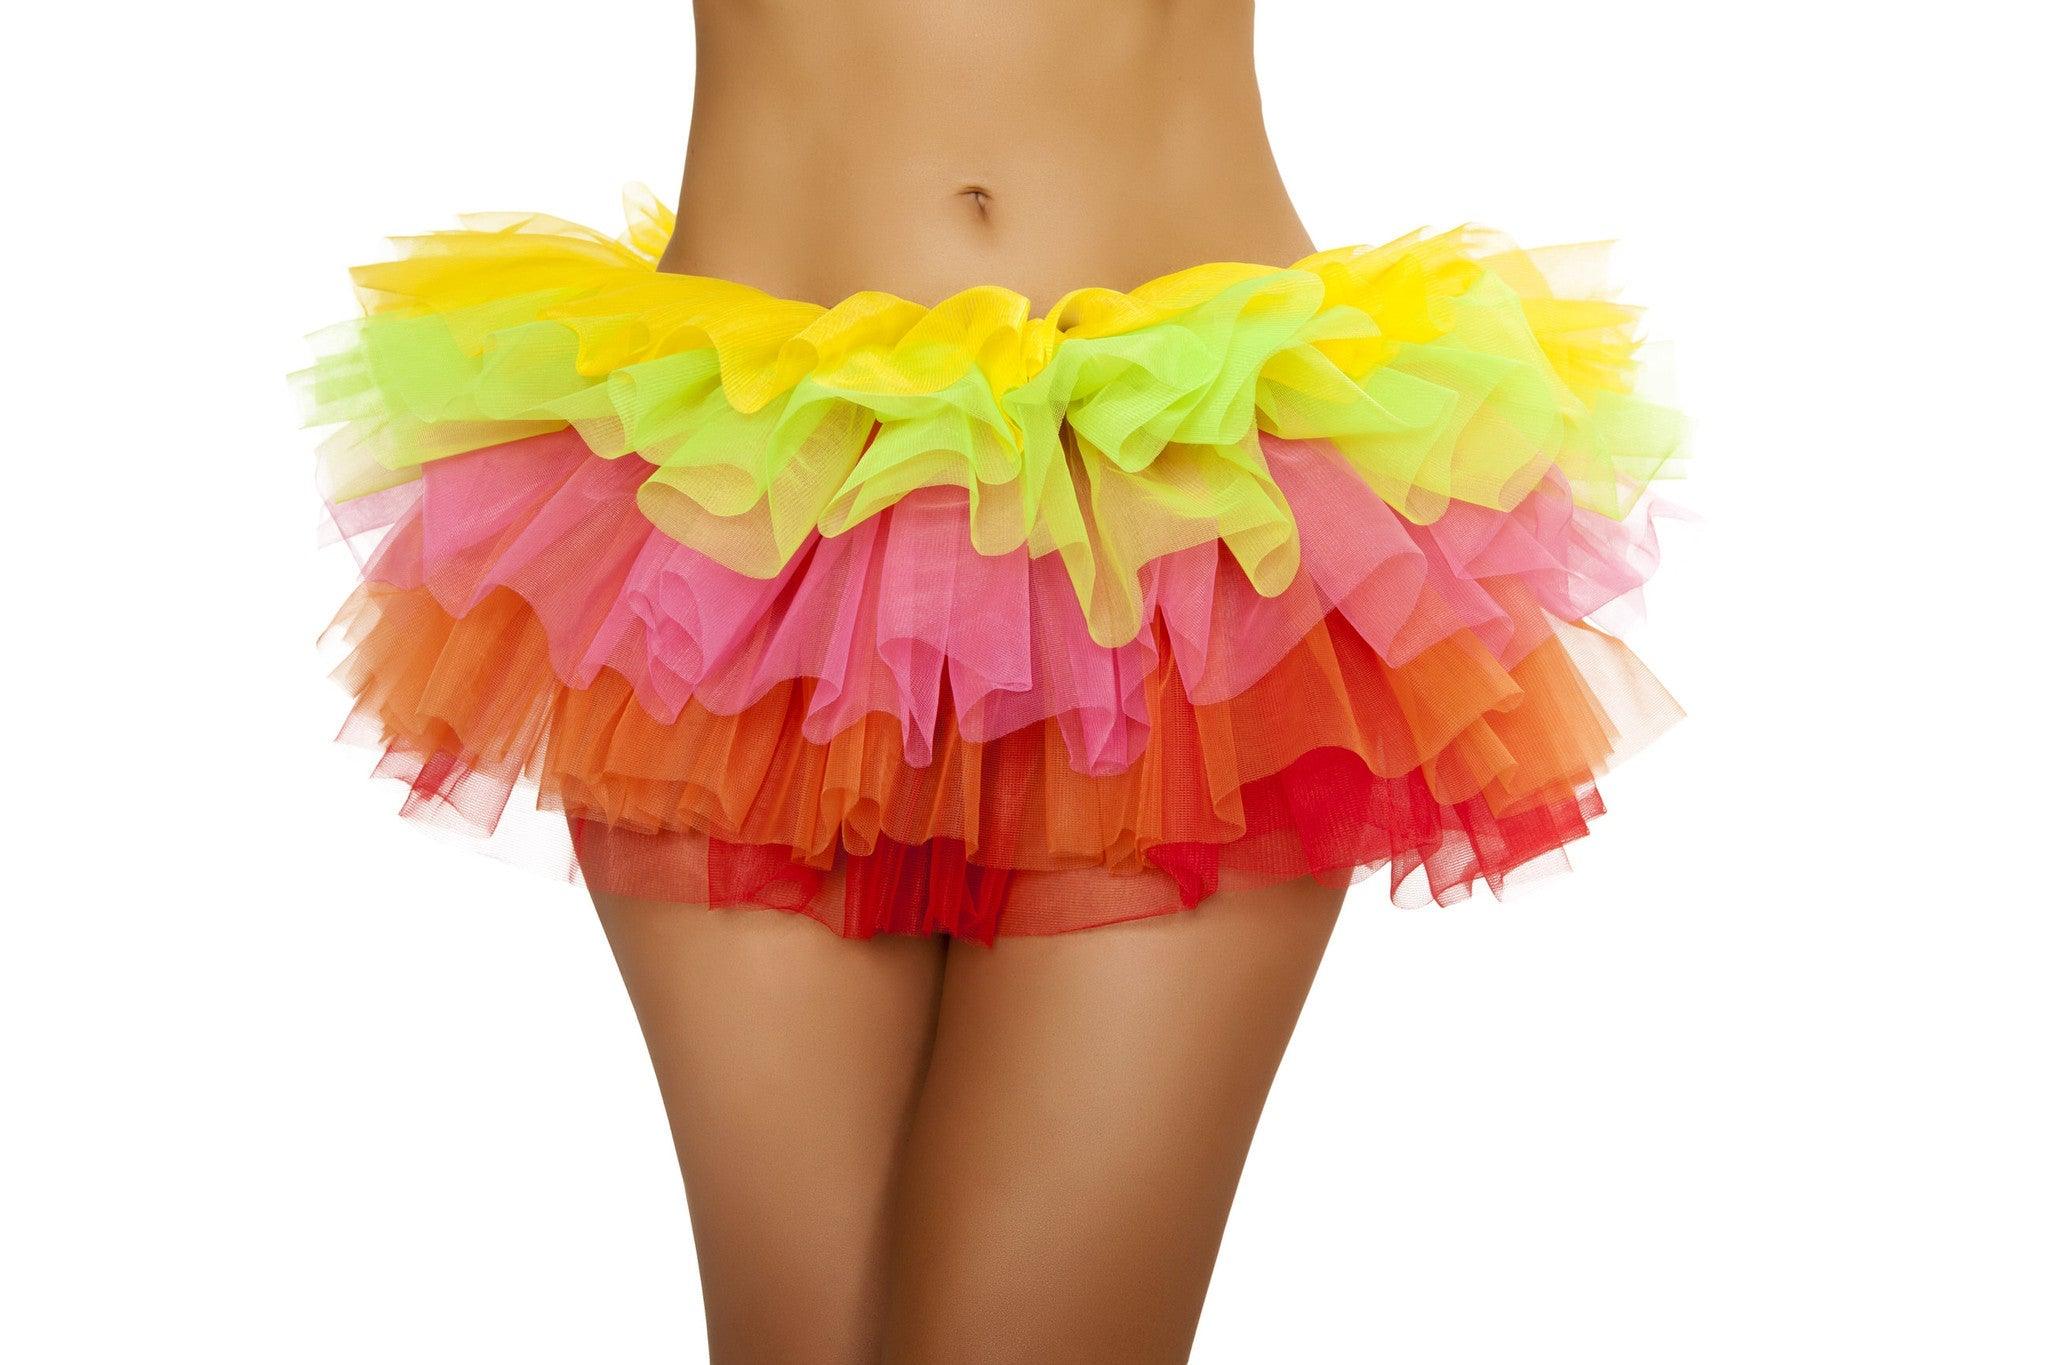 Roma Costume Mini Petticoat features as fluffy and ruffle striped - Flyclothing LLC